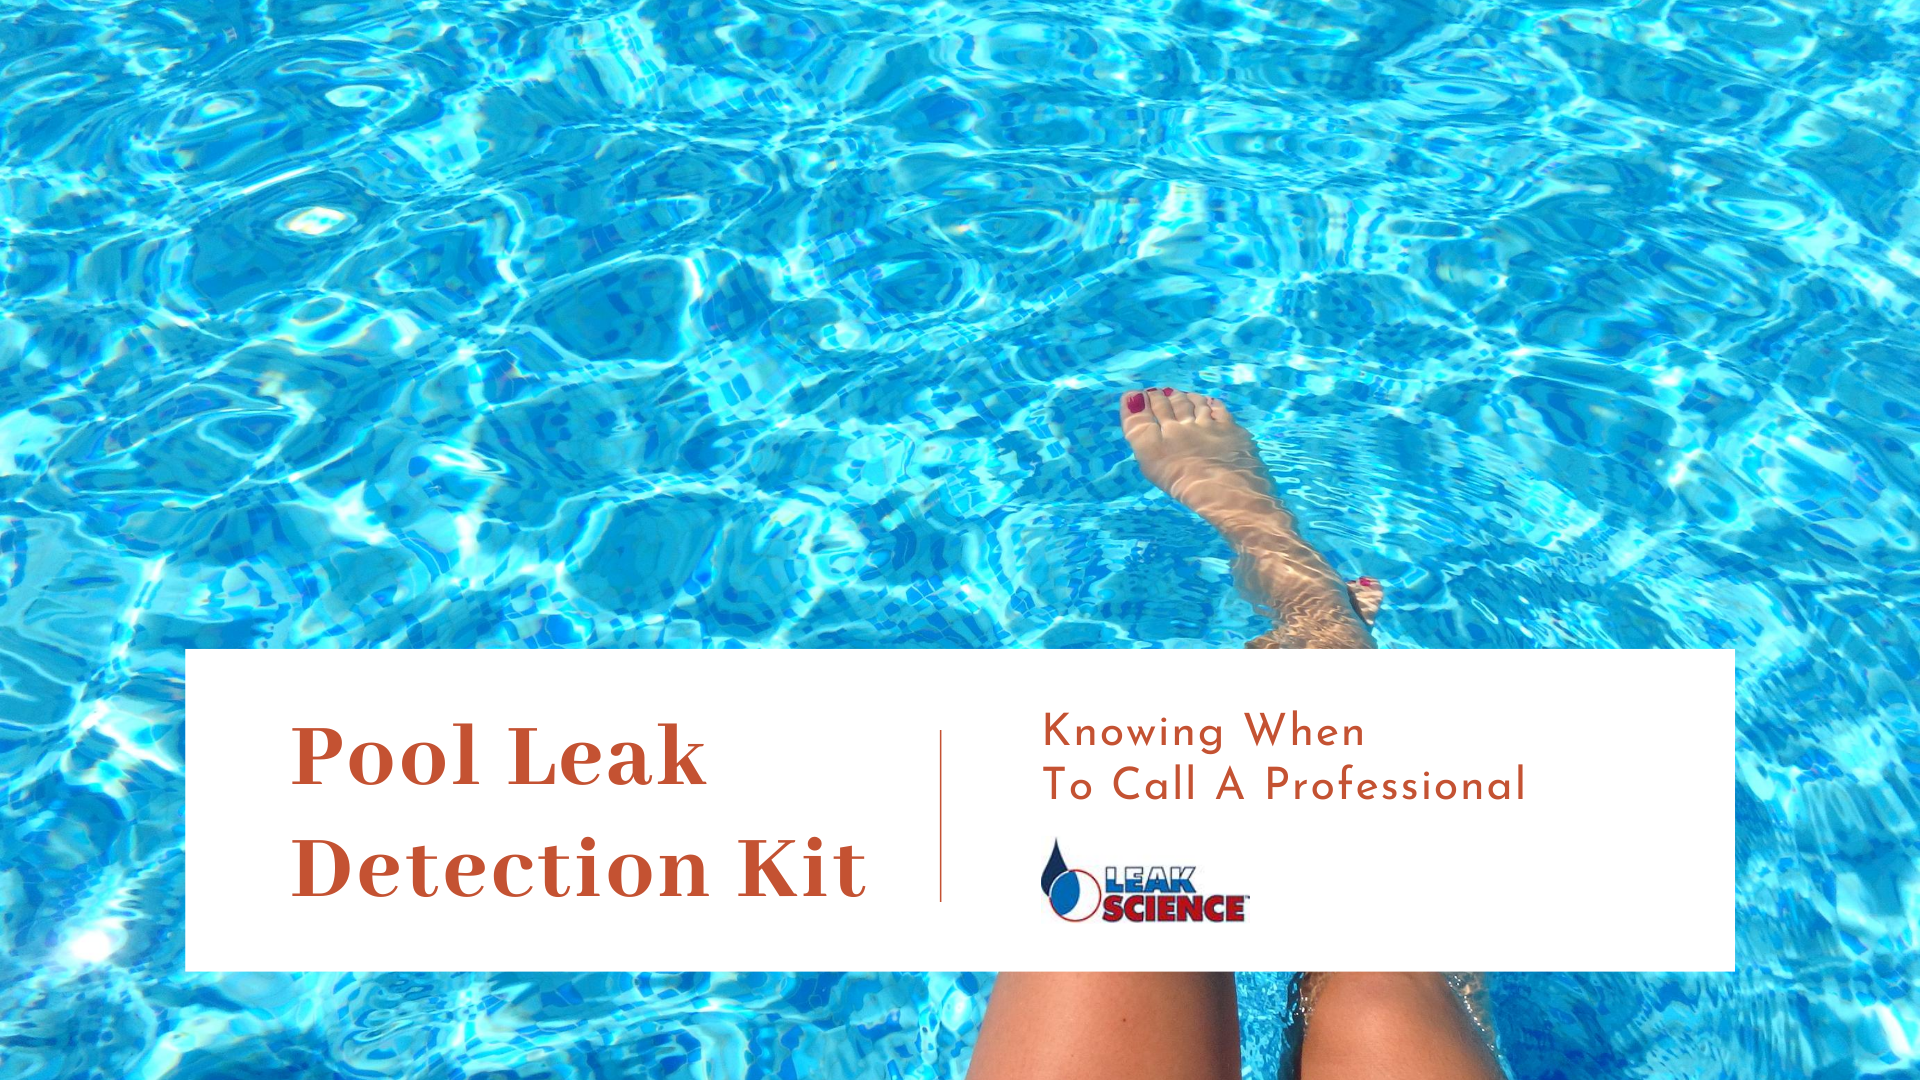 Pool leak Detection Kit - Knowing when to Call A Professional